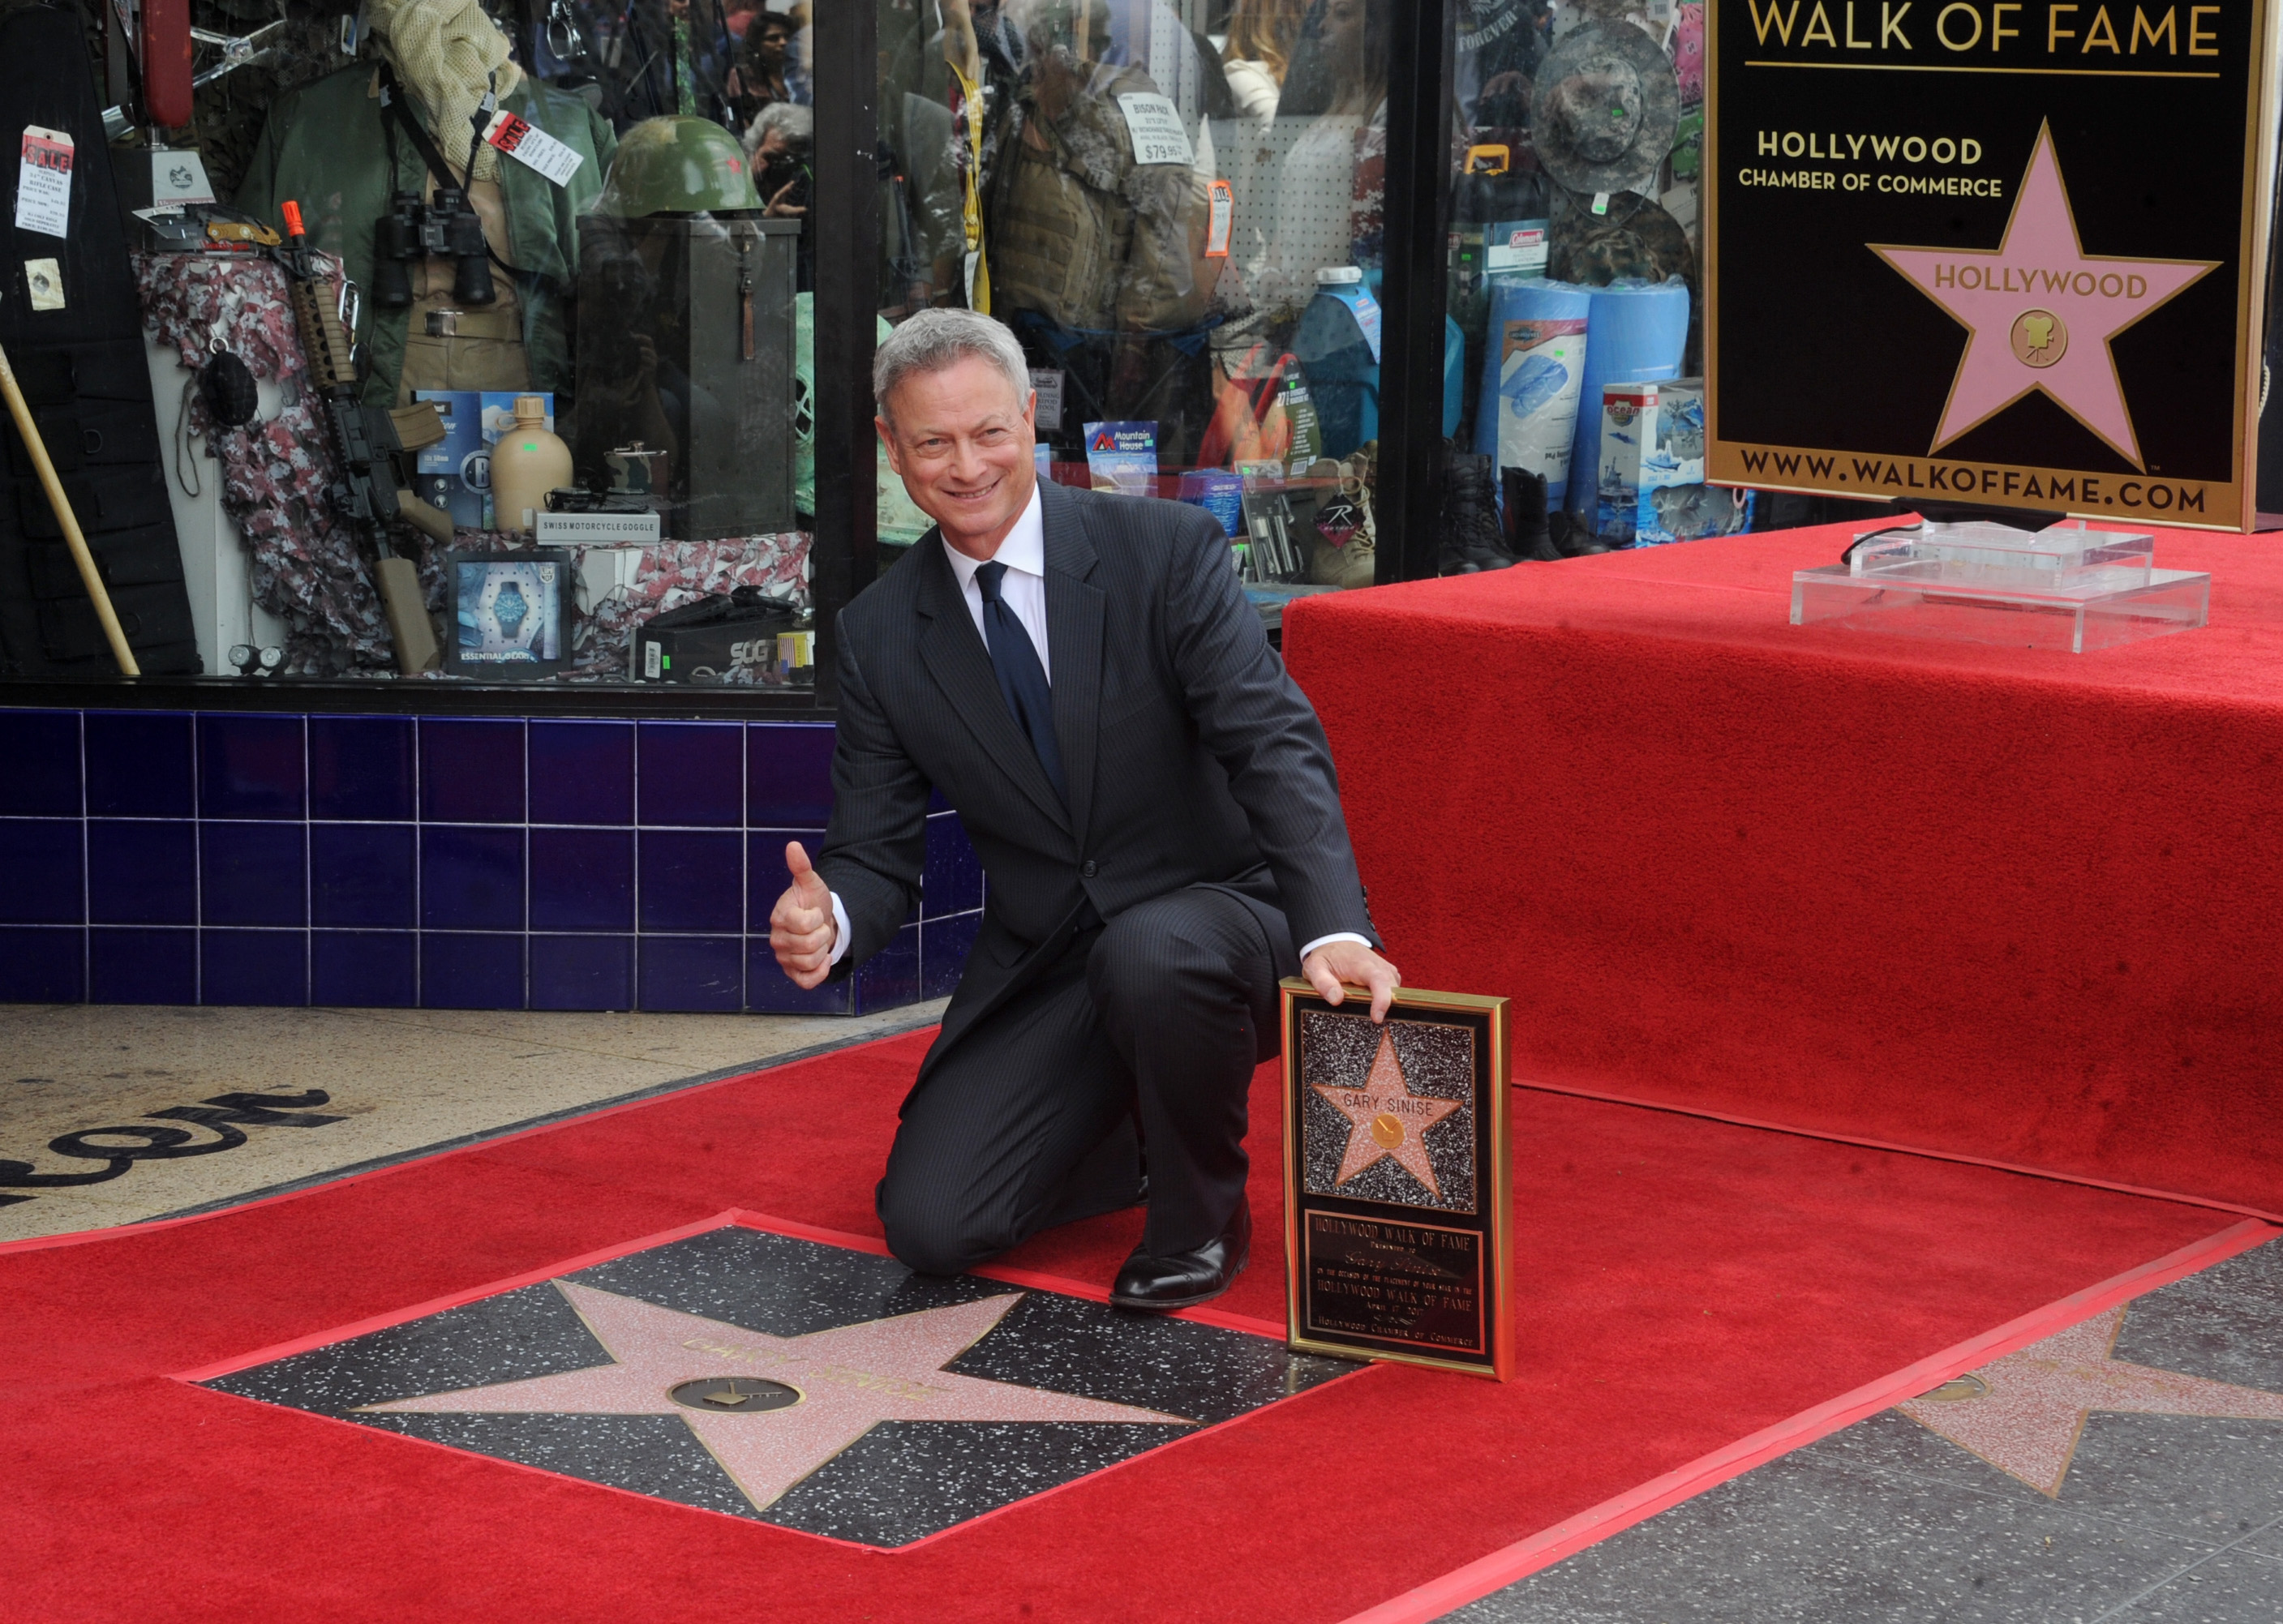 Gary Sinise Honored With Star On The Hollywood Walk Of Fame in Hollywood, California, on April 17, 2017. | Source: Getty Images